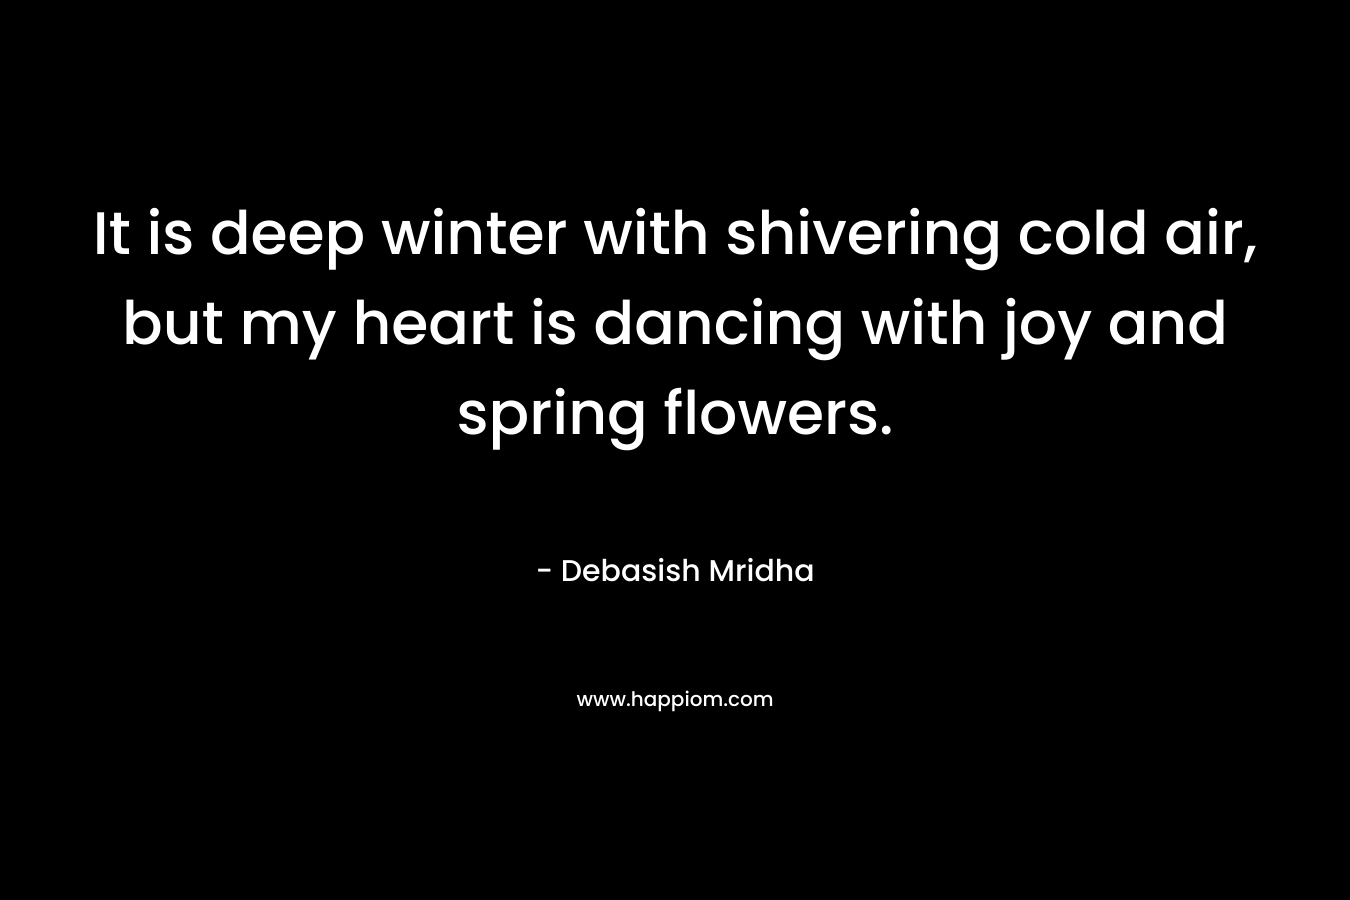 It is deep winter with shivering cold air, but my heart is dancing with joy and spring flowers. – Debasish Mridha